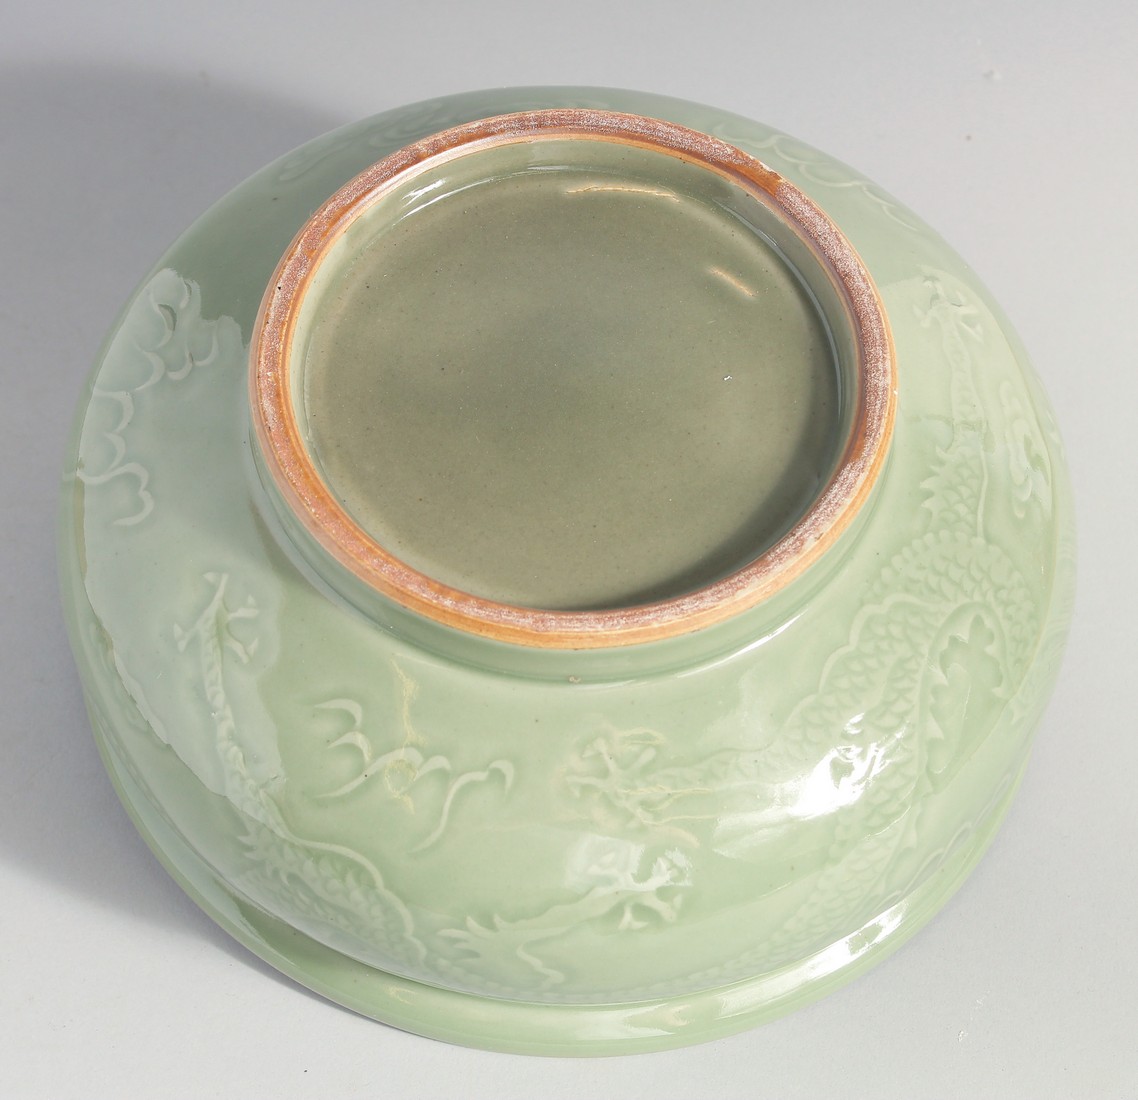 A LARGE CHINESE CELADON GLAZE BOWL, carved with dragon and the flaming pearl of wisdom, 25.5cm - Image 2 of 5